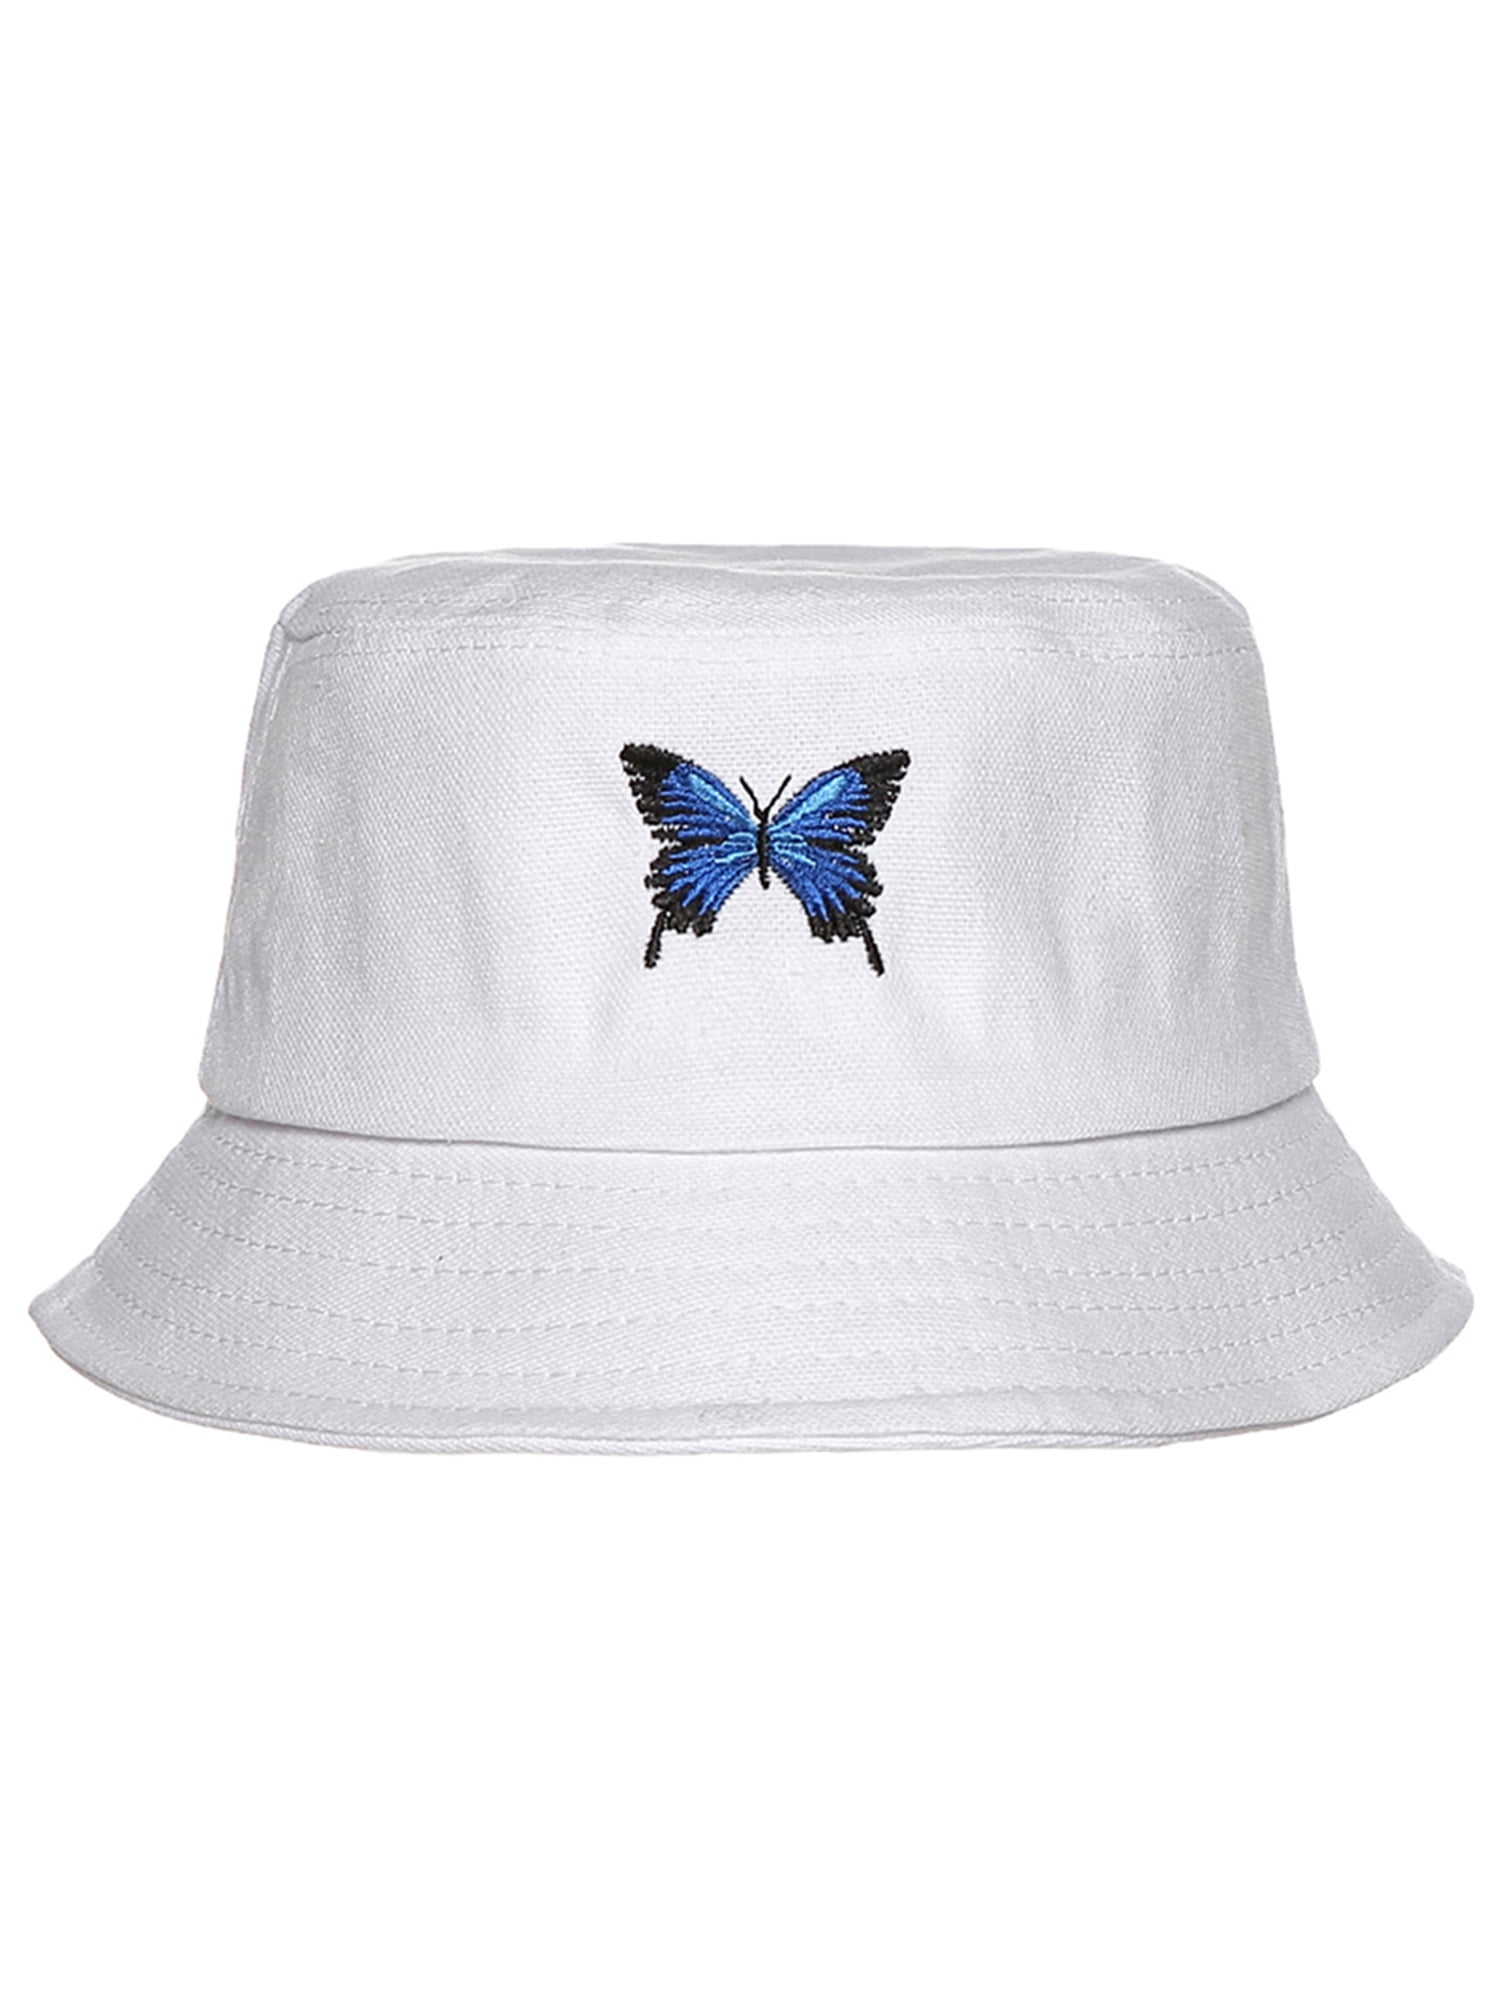 Flat Top Breathable Bucket Hats Cap Unisex Mountains and Eagles Bucket Hat Summer Fishermans Hat 